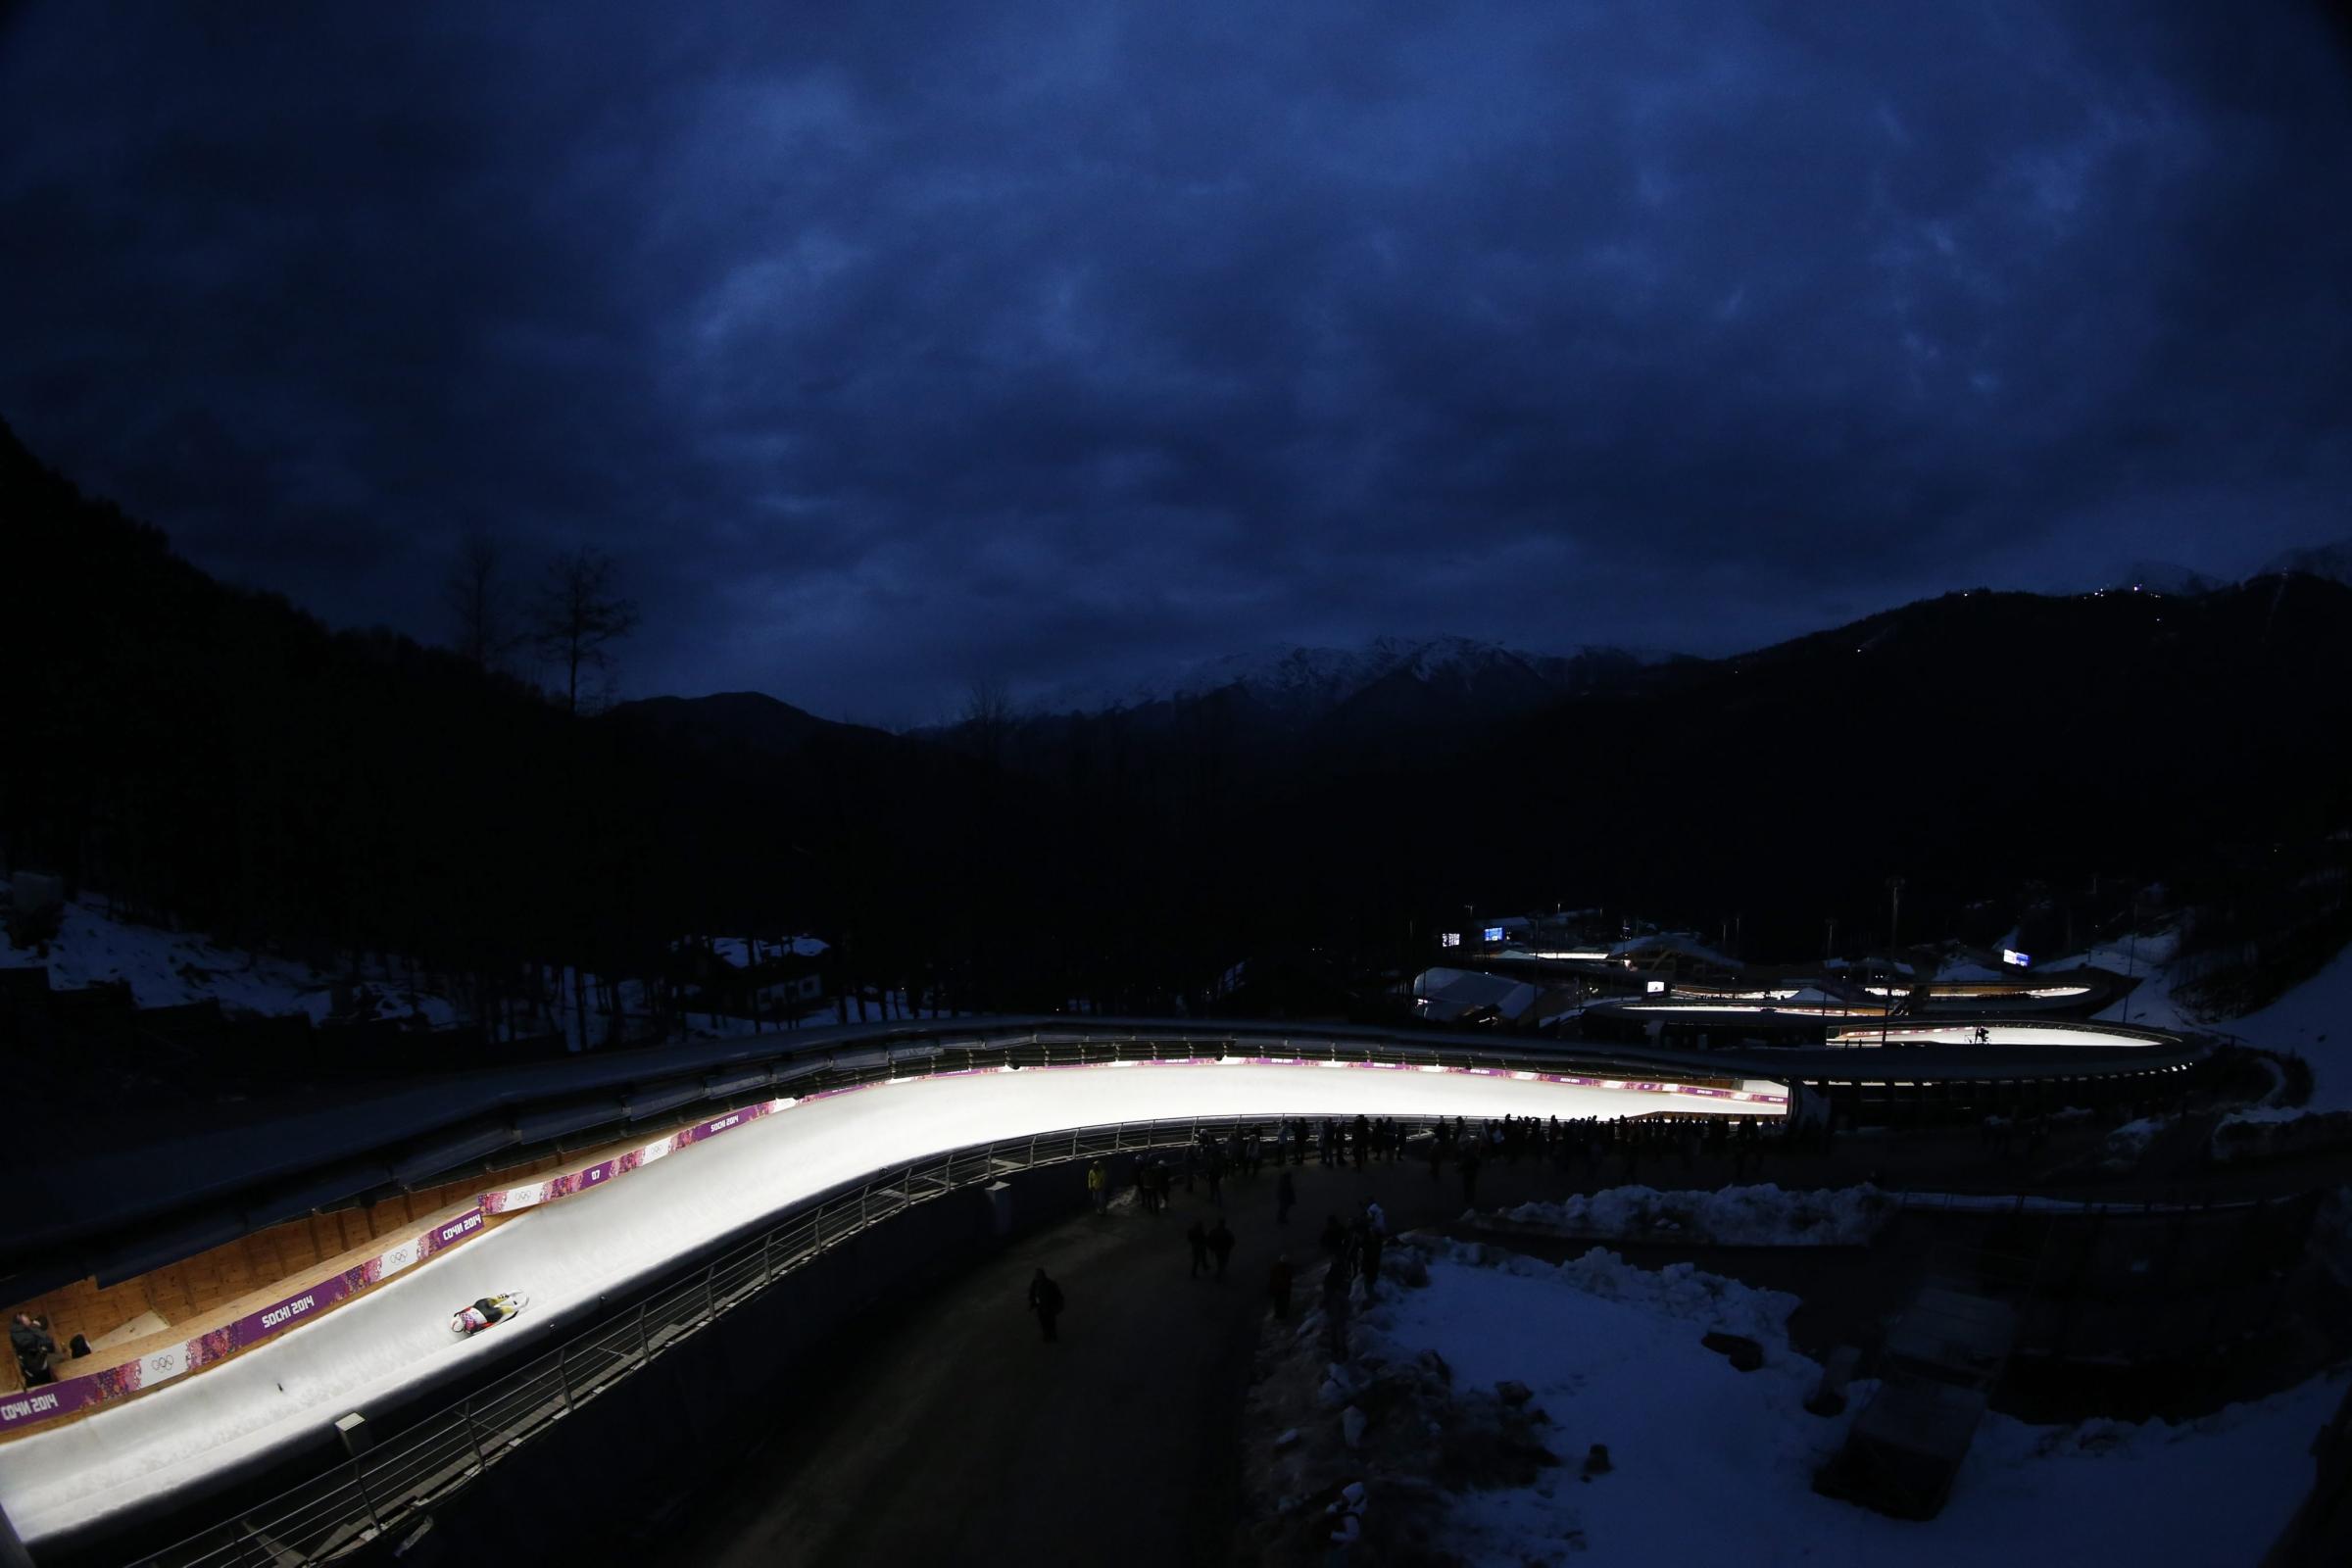 Natalie Geisenberger of Germany in action during the Women's Singles Luge competition at the Sanki Sliding Center.